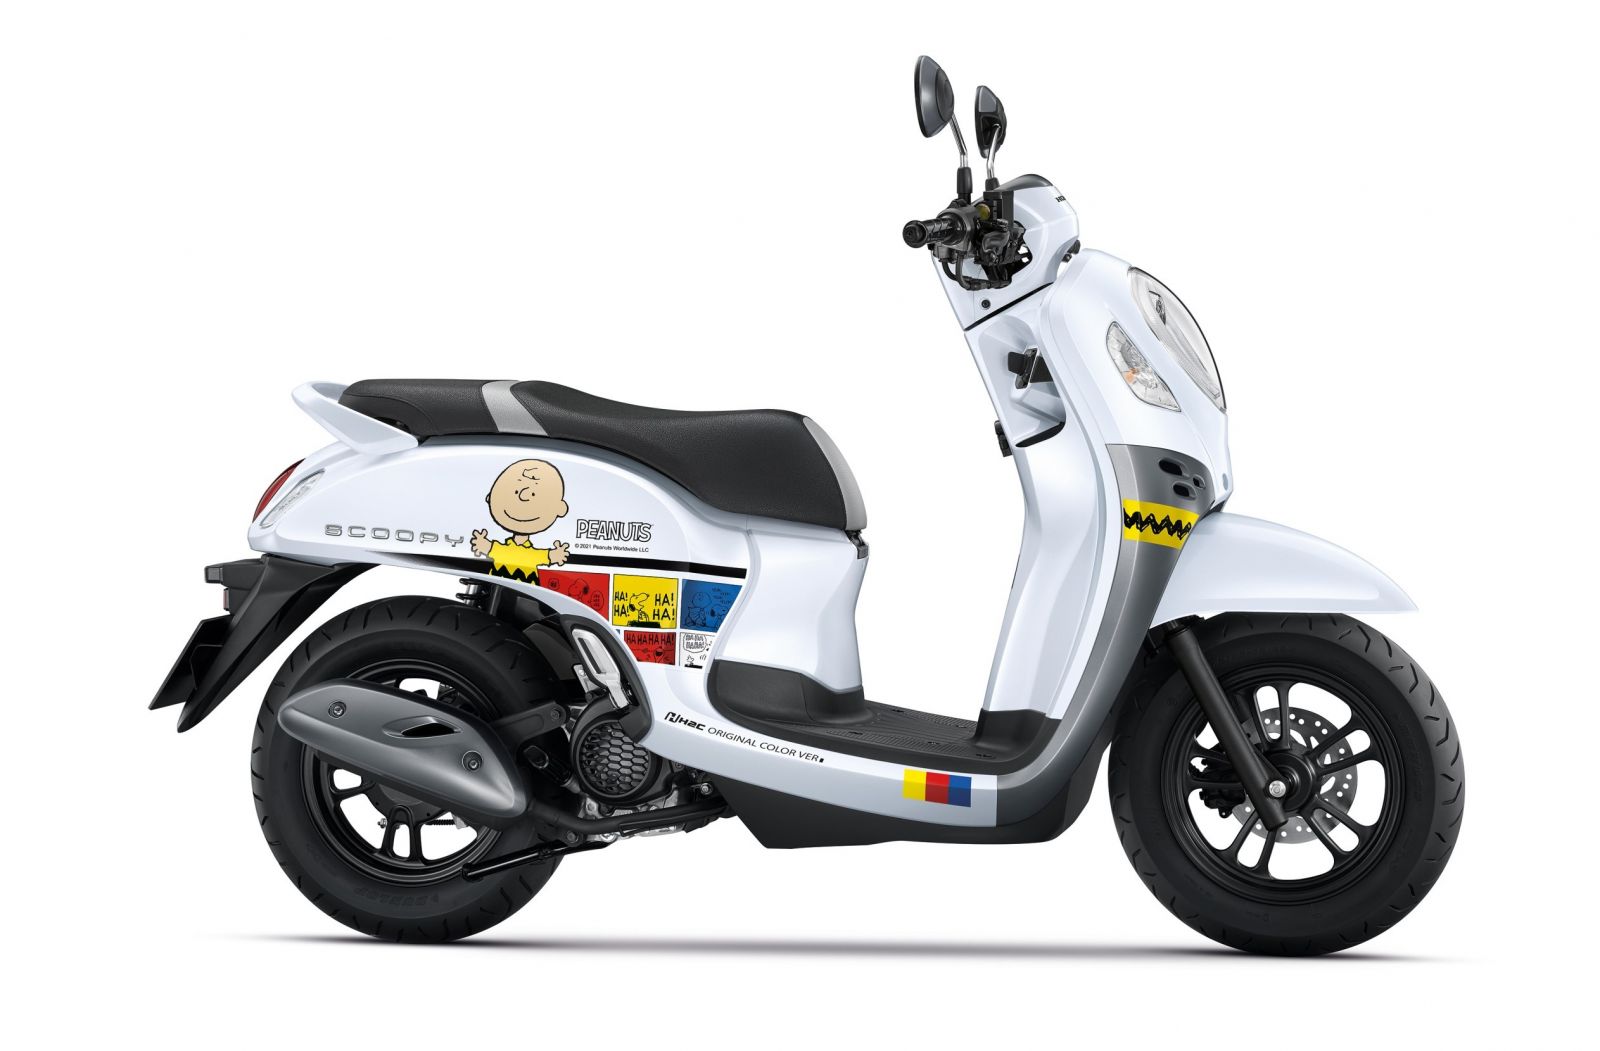 Honda Scoopy Snoopy Limited Edition